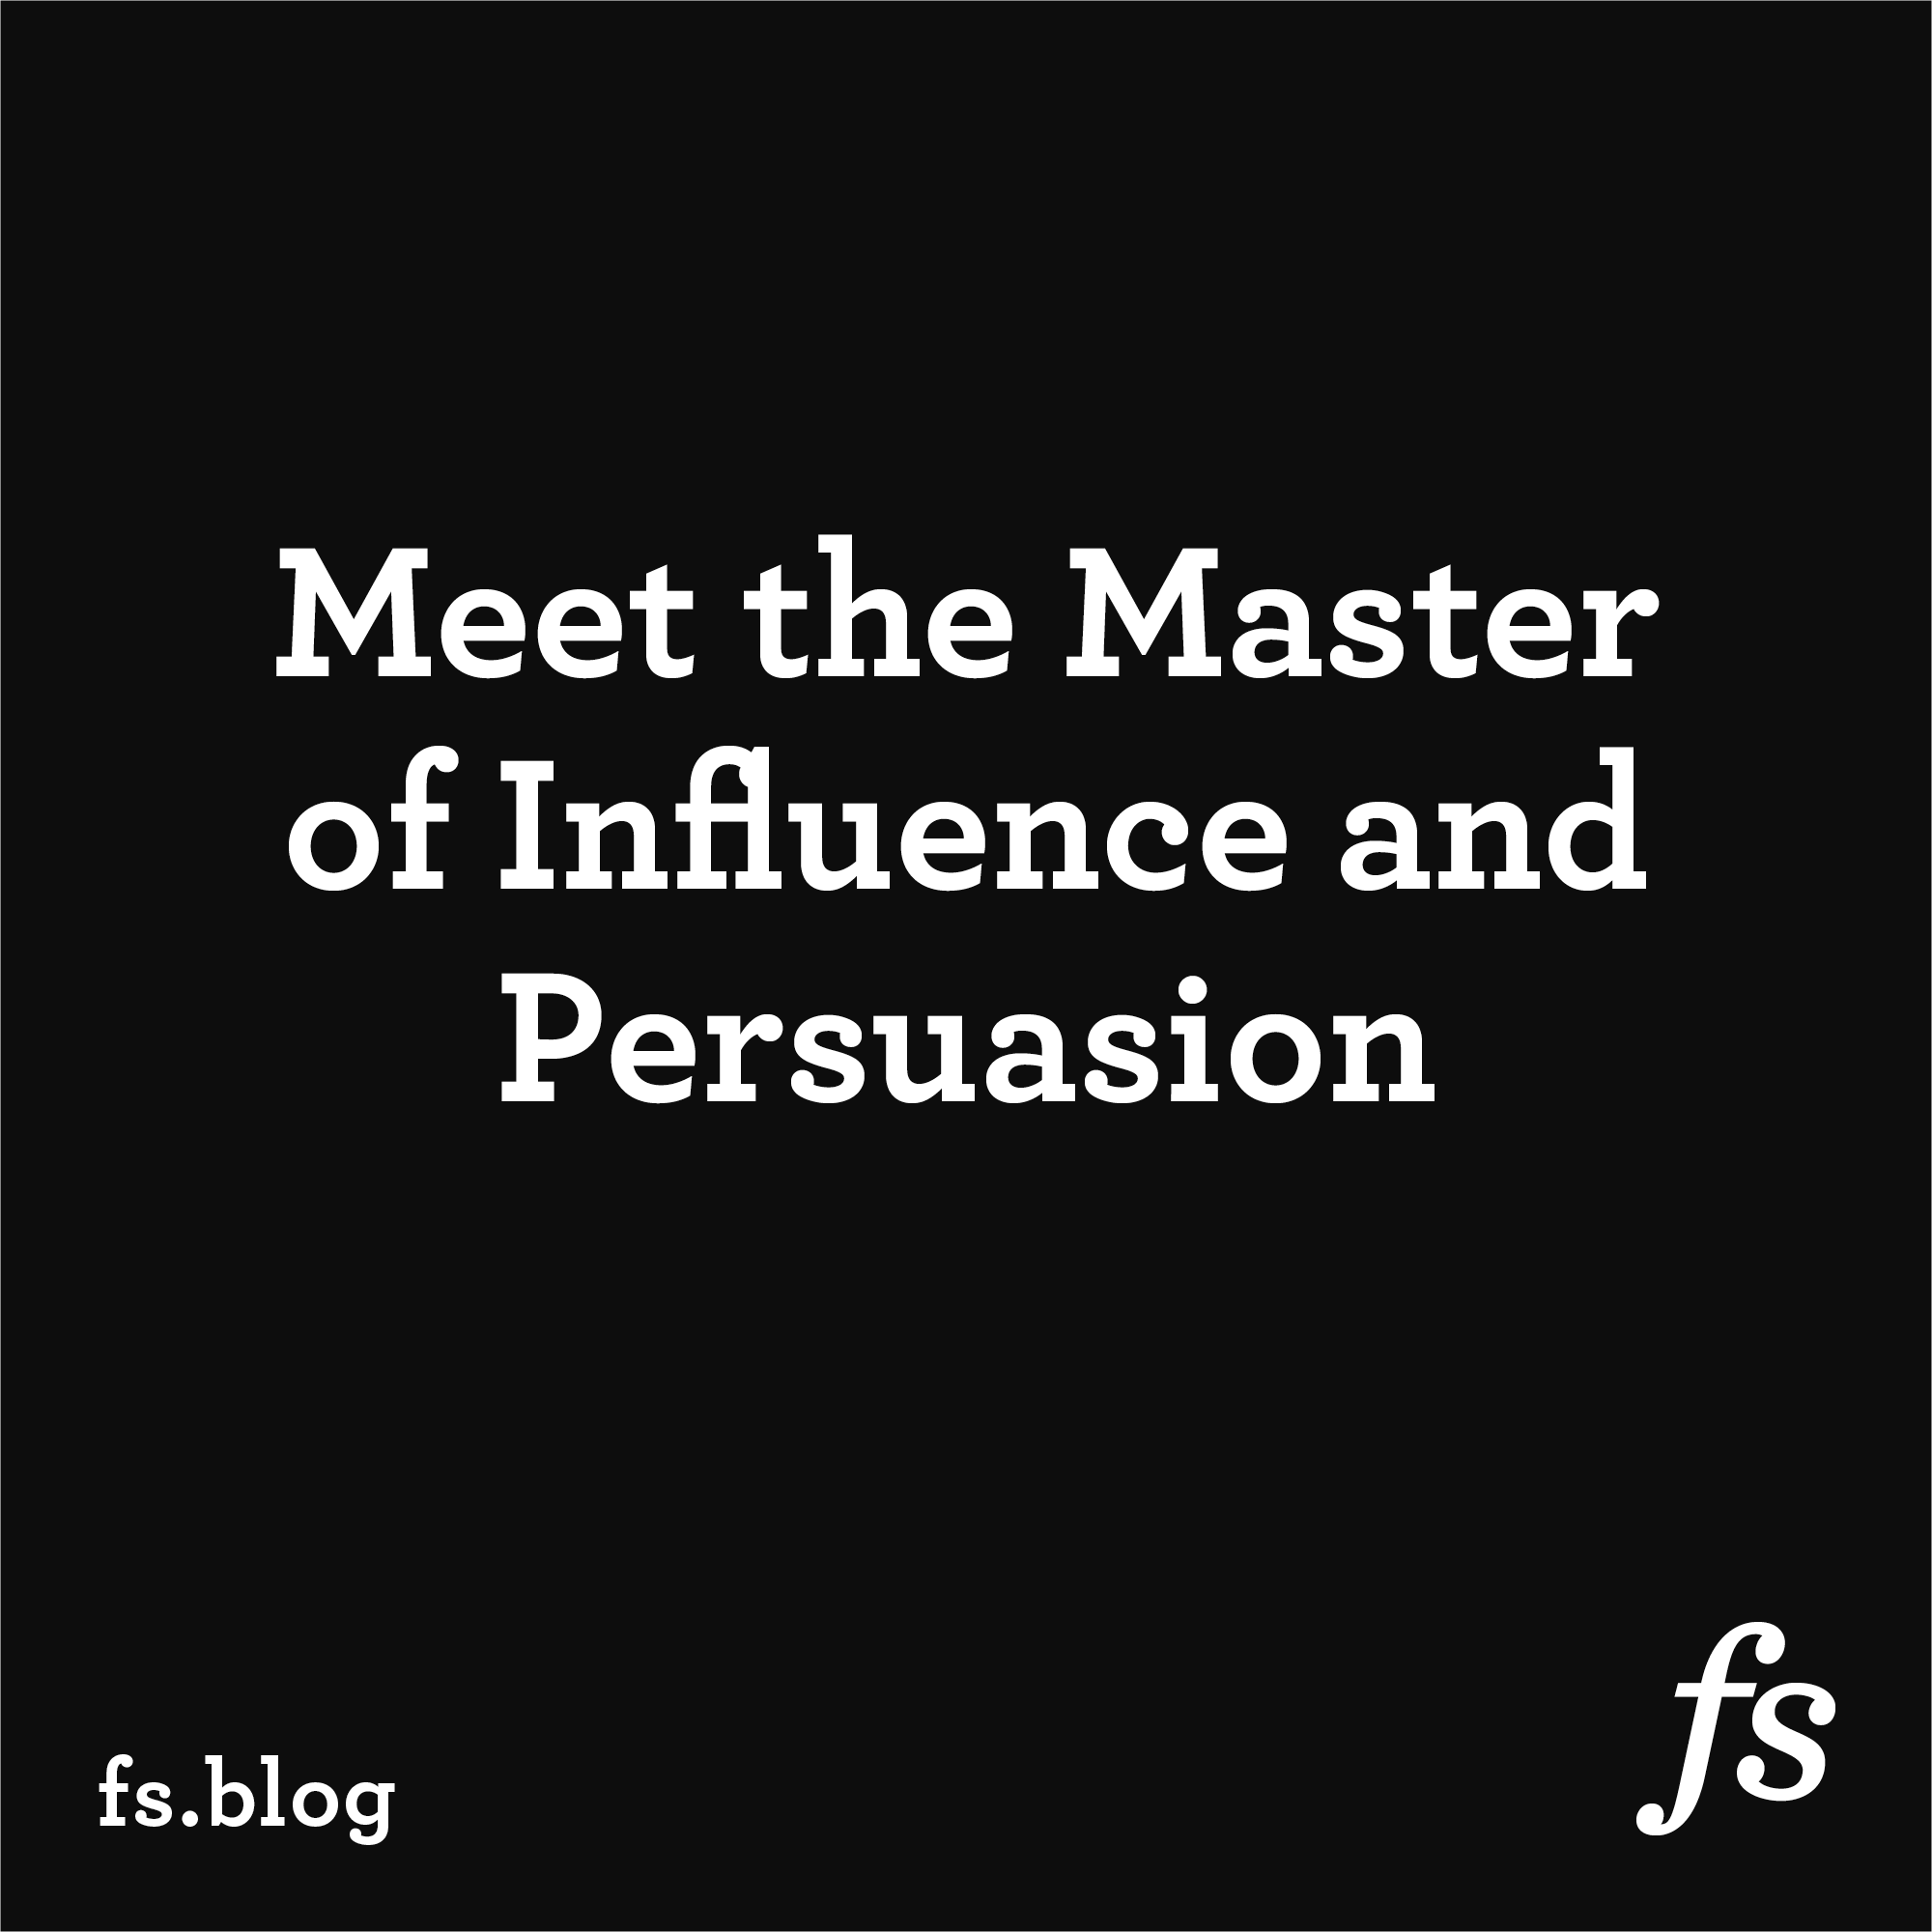 Robert Cialdini: How To Master The Art Of 'Pre-Suasion